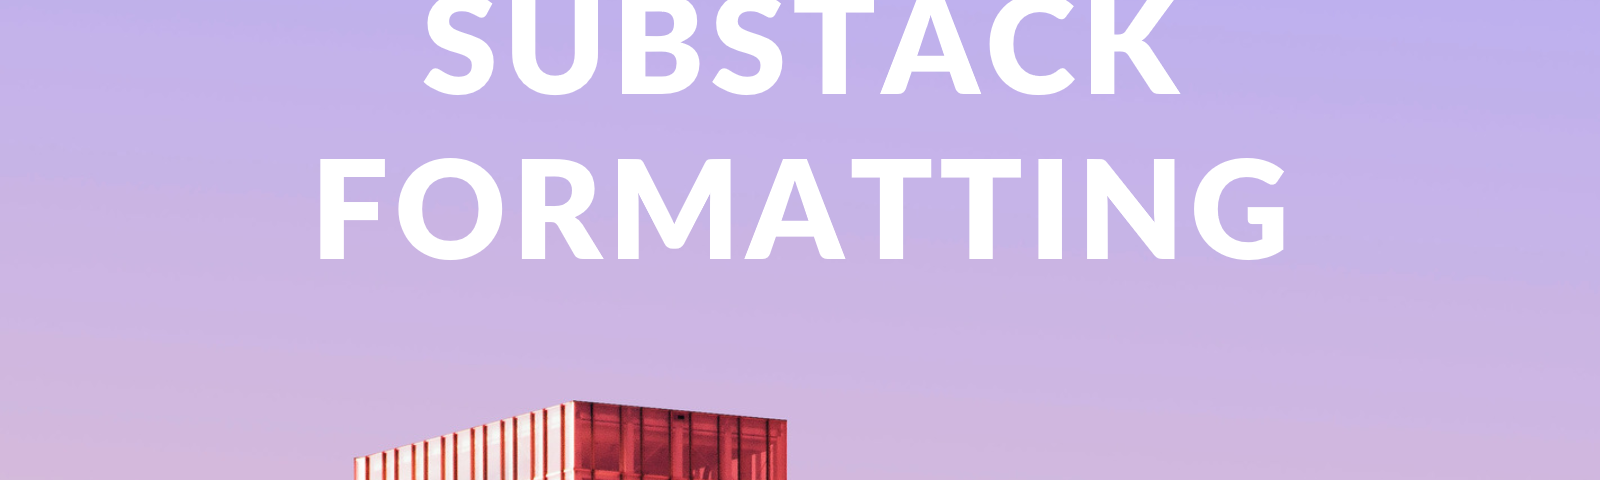 substack formatting, substack format, substack faq, substack editor, substack newsletter, what is substack, substack review